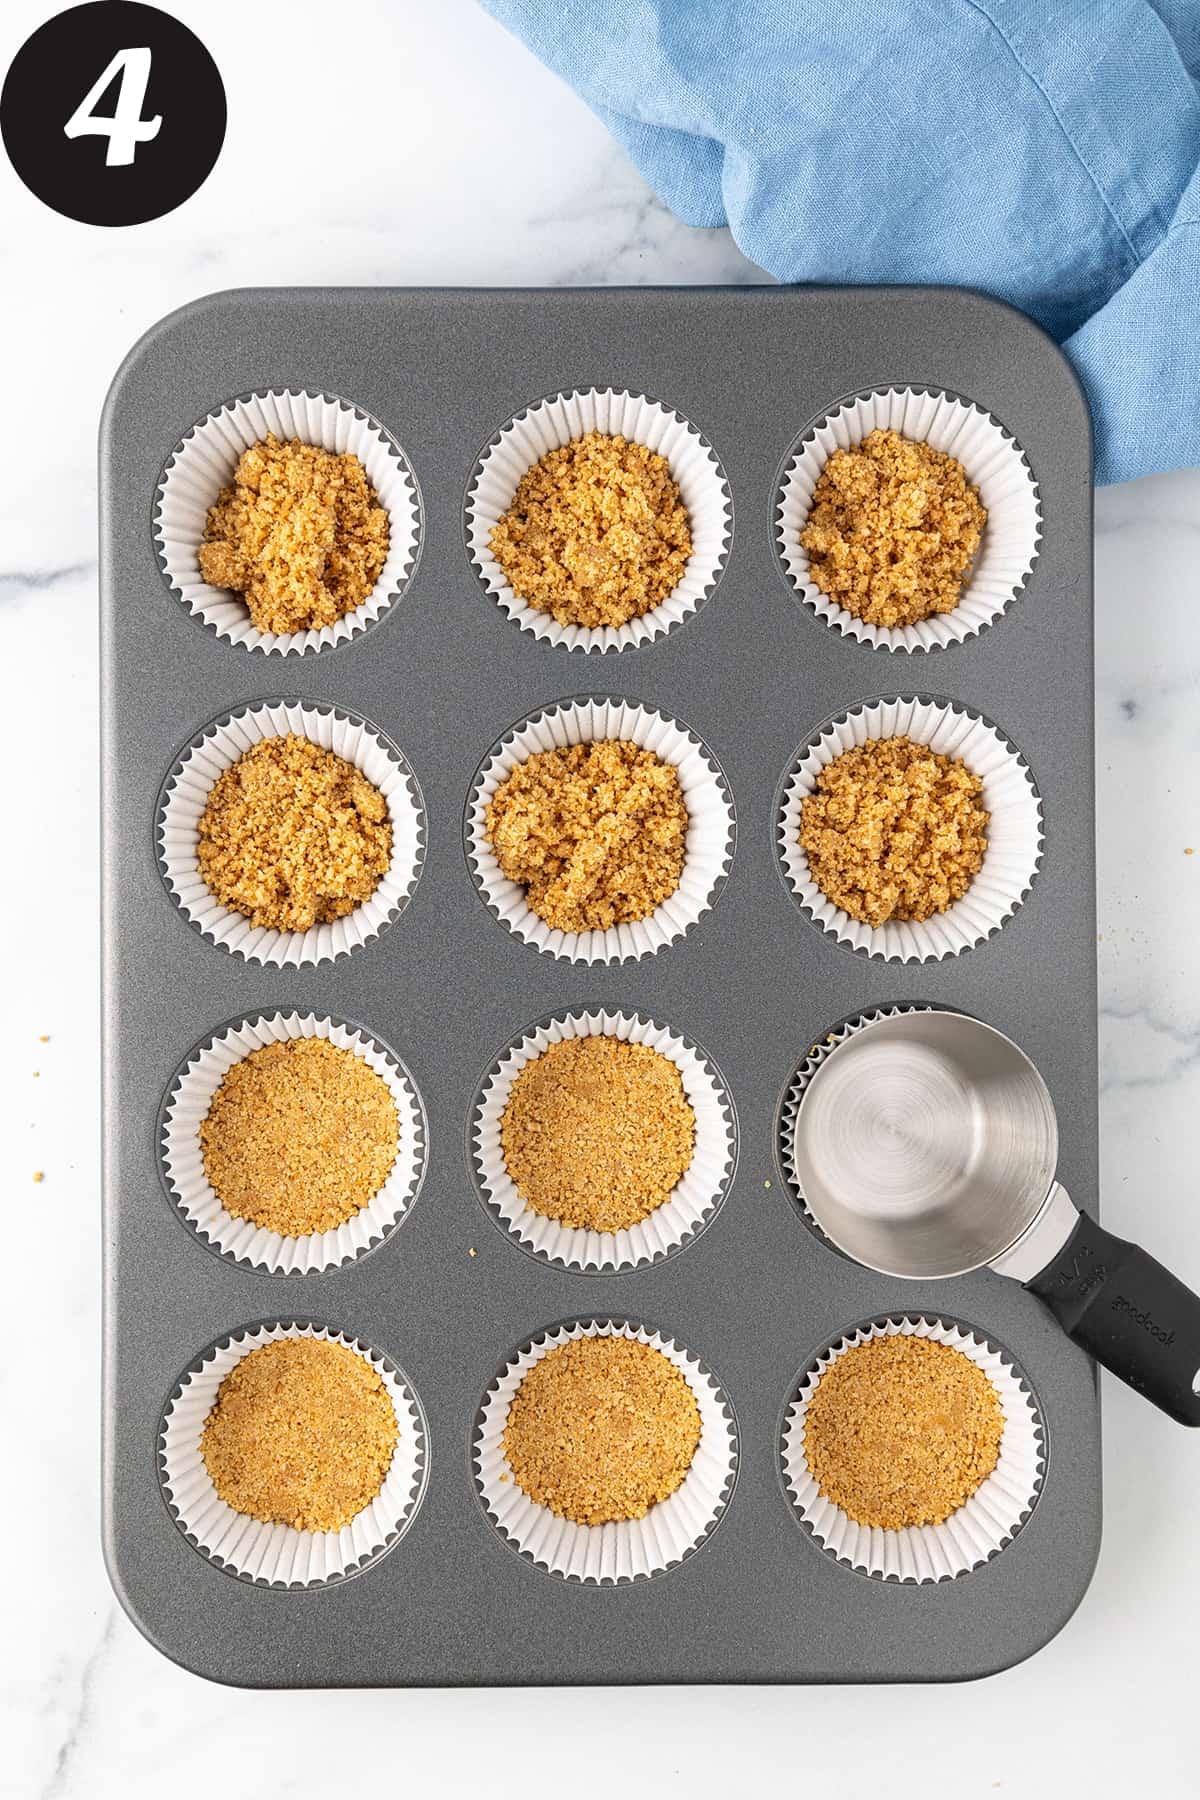 A regular sized muffin pan filled with paper cupcake liners, filled with a graham cracker butter mixture and a flat bottomed measuring cup pressing the crumbs down flat to form a crust.